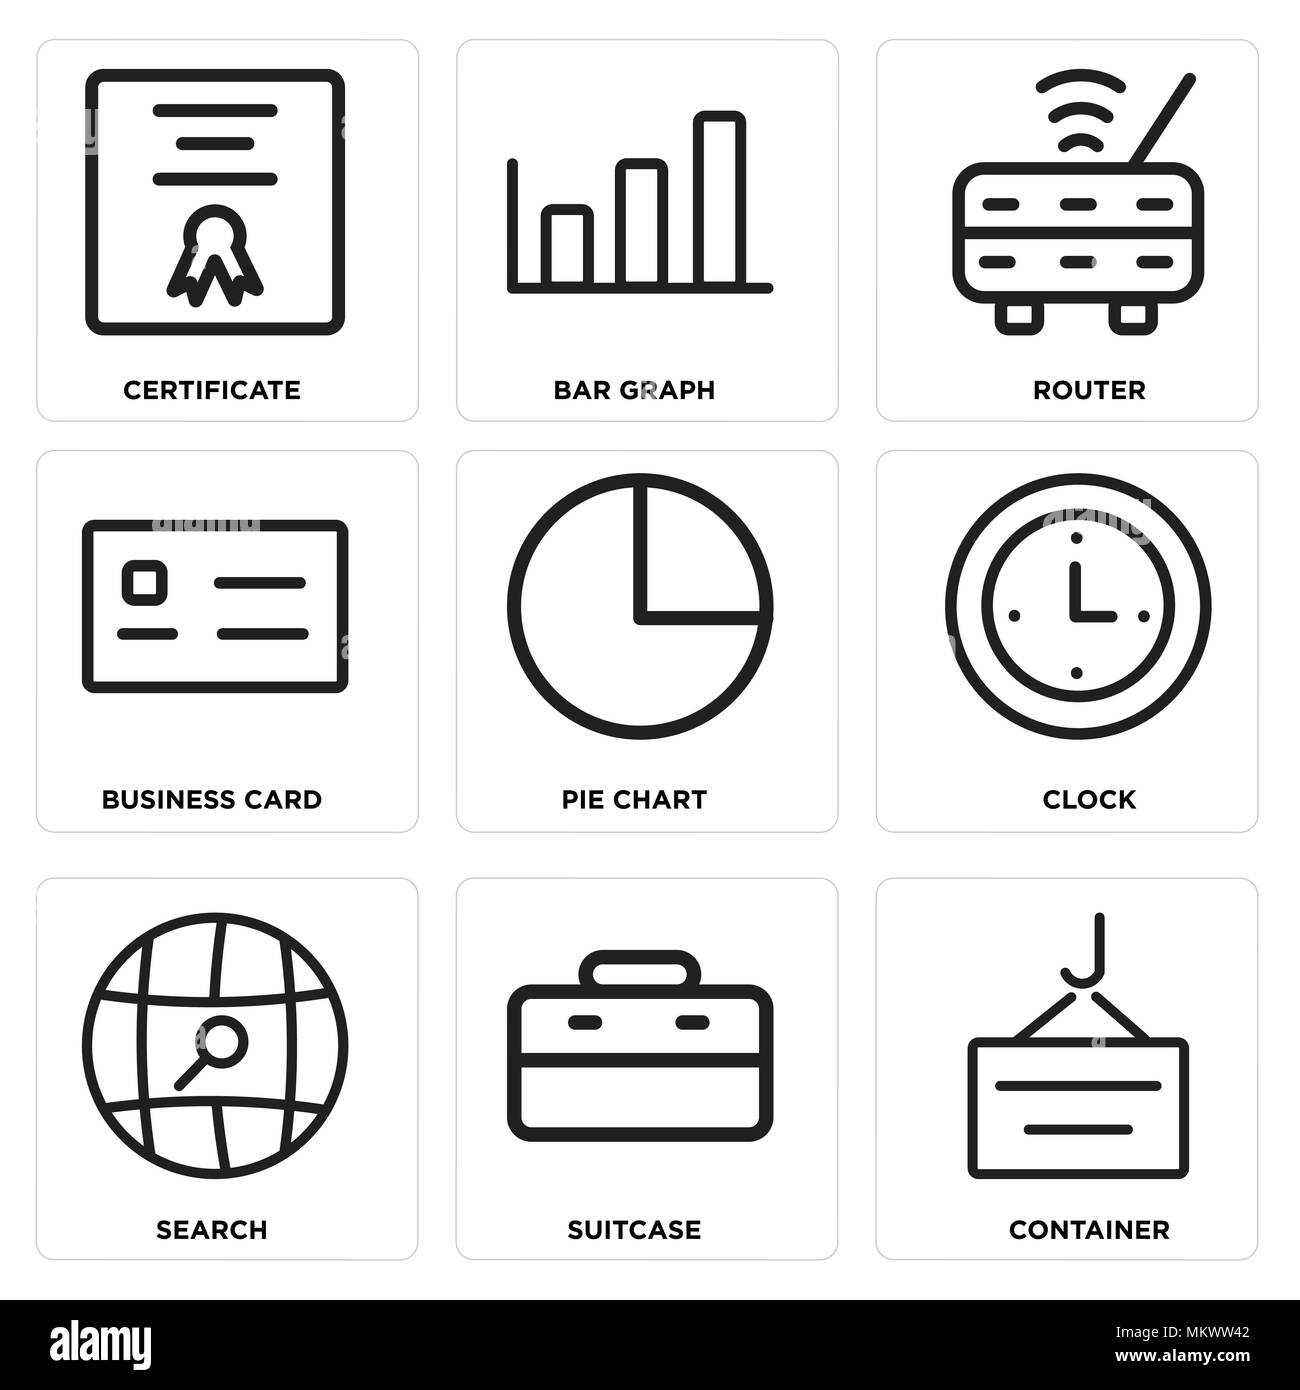 Set Of 9 simple editable icons such as Container, Suitcase, Search, Clock, Pie chart, Business card, Router, Bar graph, Certificate, can be used for m Stock Vector